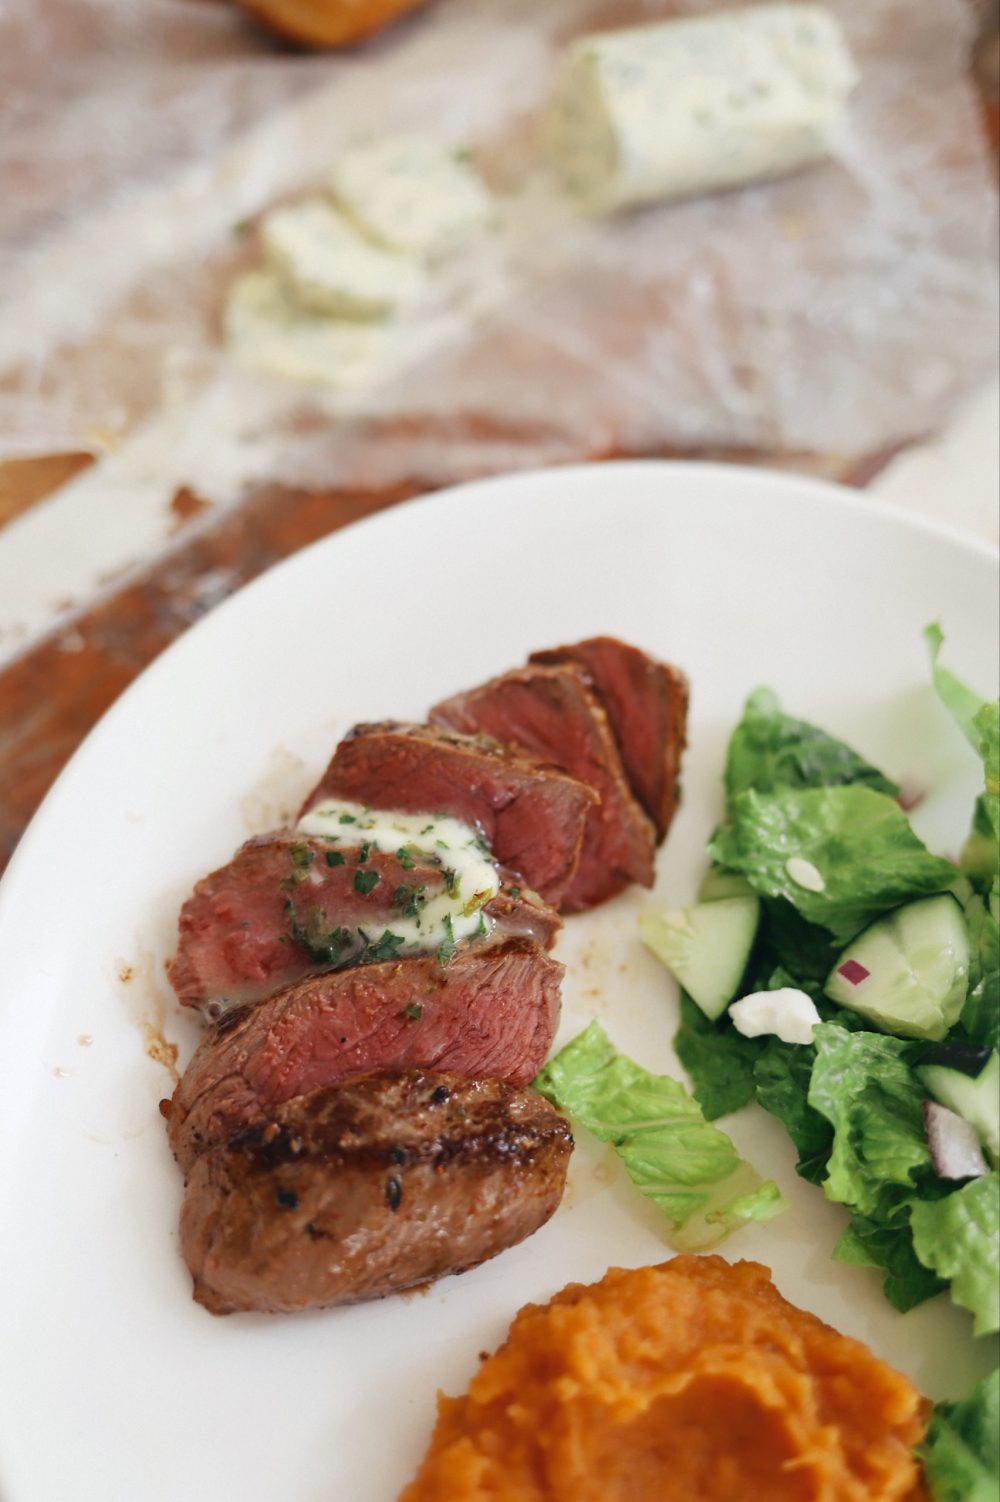 Homemade Steak Butter: How to Make an Easy Steakhouse Herb Butter for Steak |Steak Butter by popular Florida lifestyle blog, Fresh Mommy Blog: image of slices pieces of steak with melted steak butter on top. 